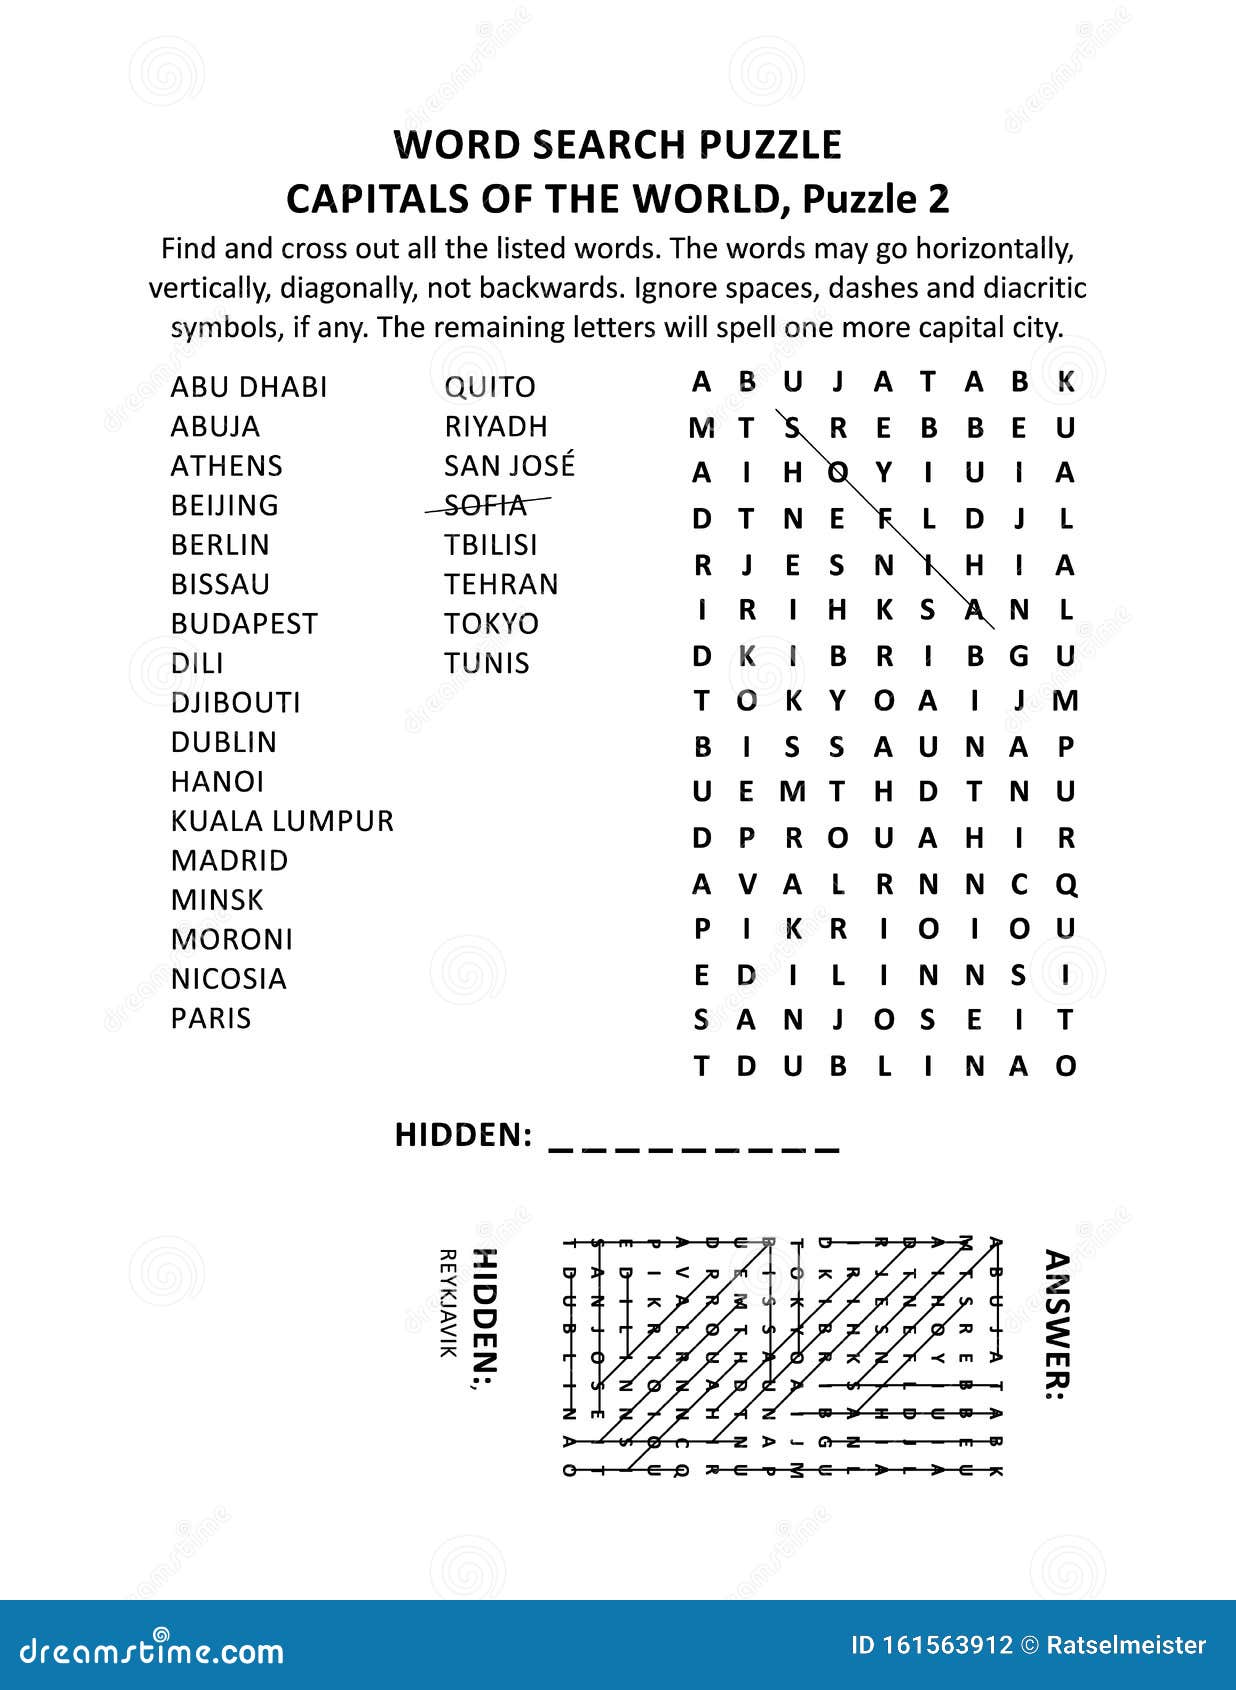 capitals of the world word search puzzle, puzzle 2 of 10